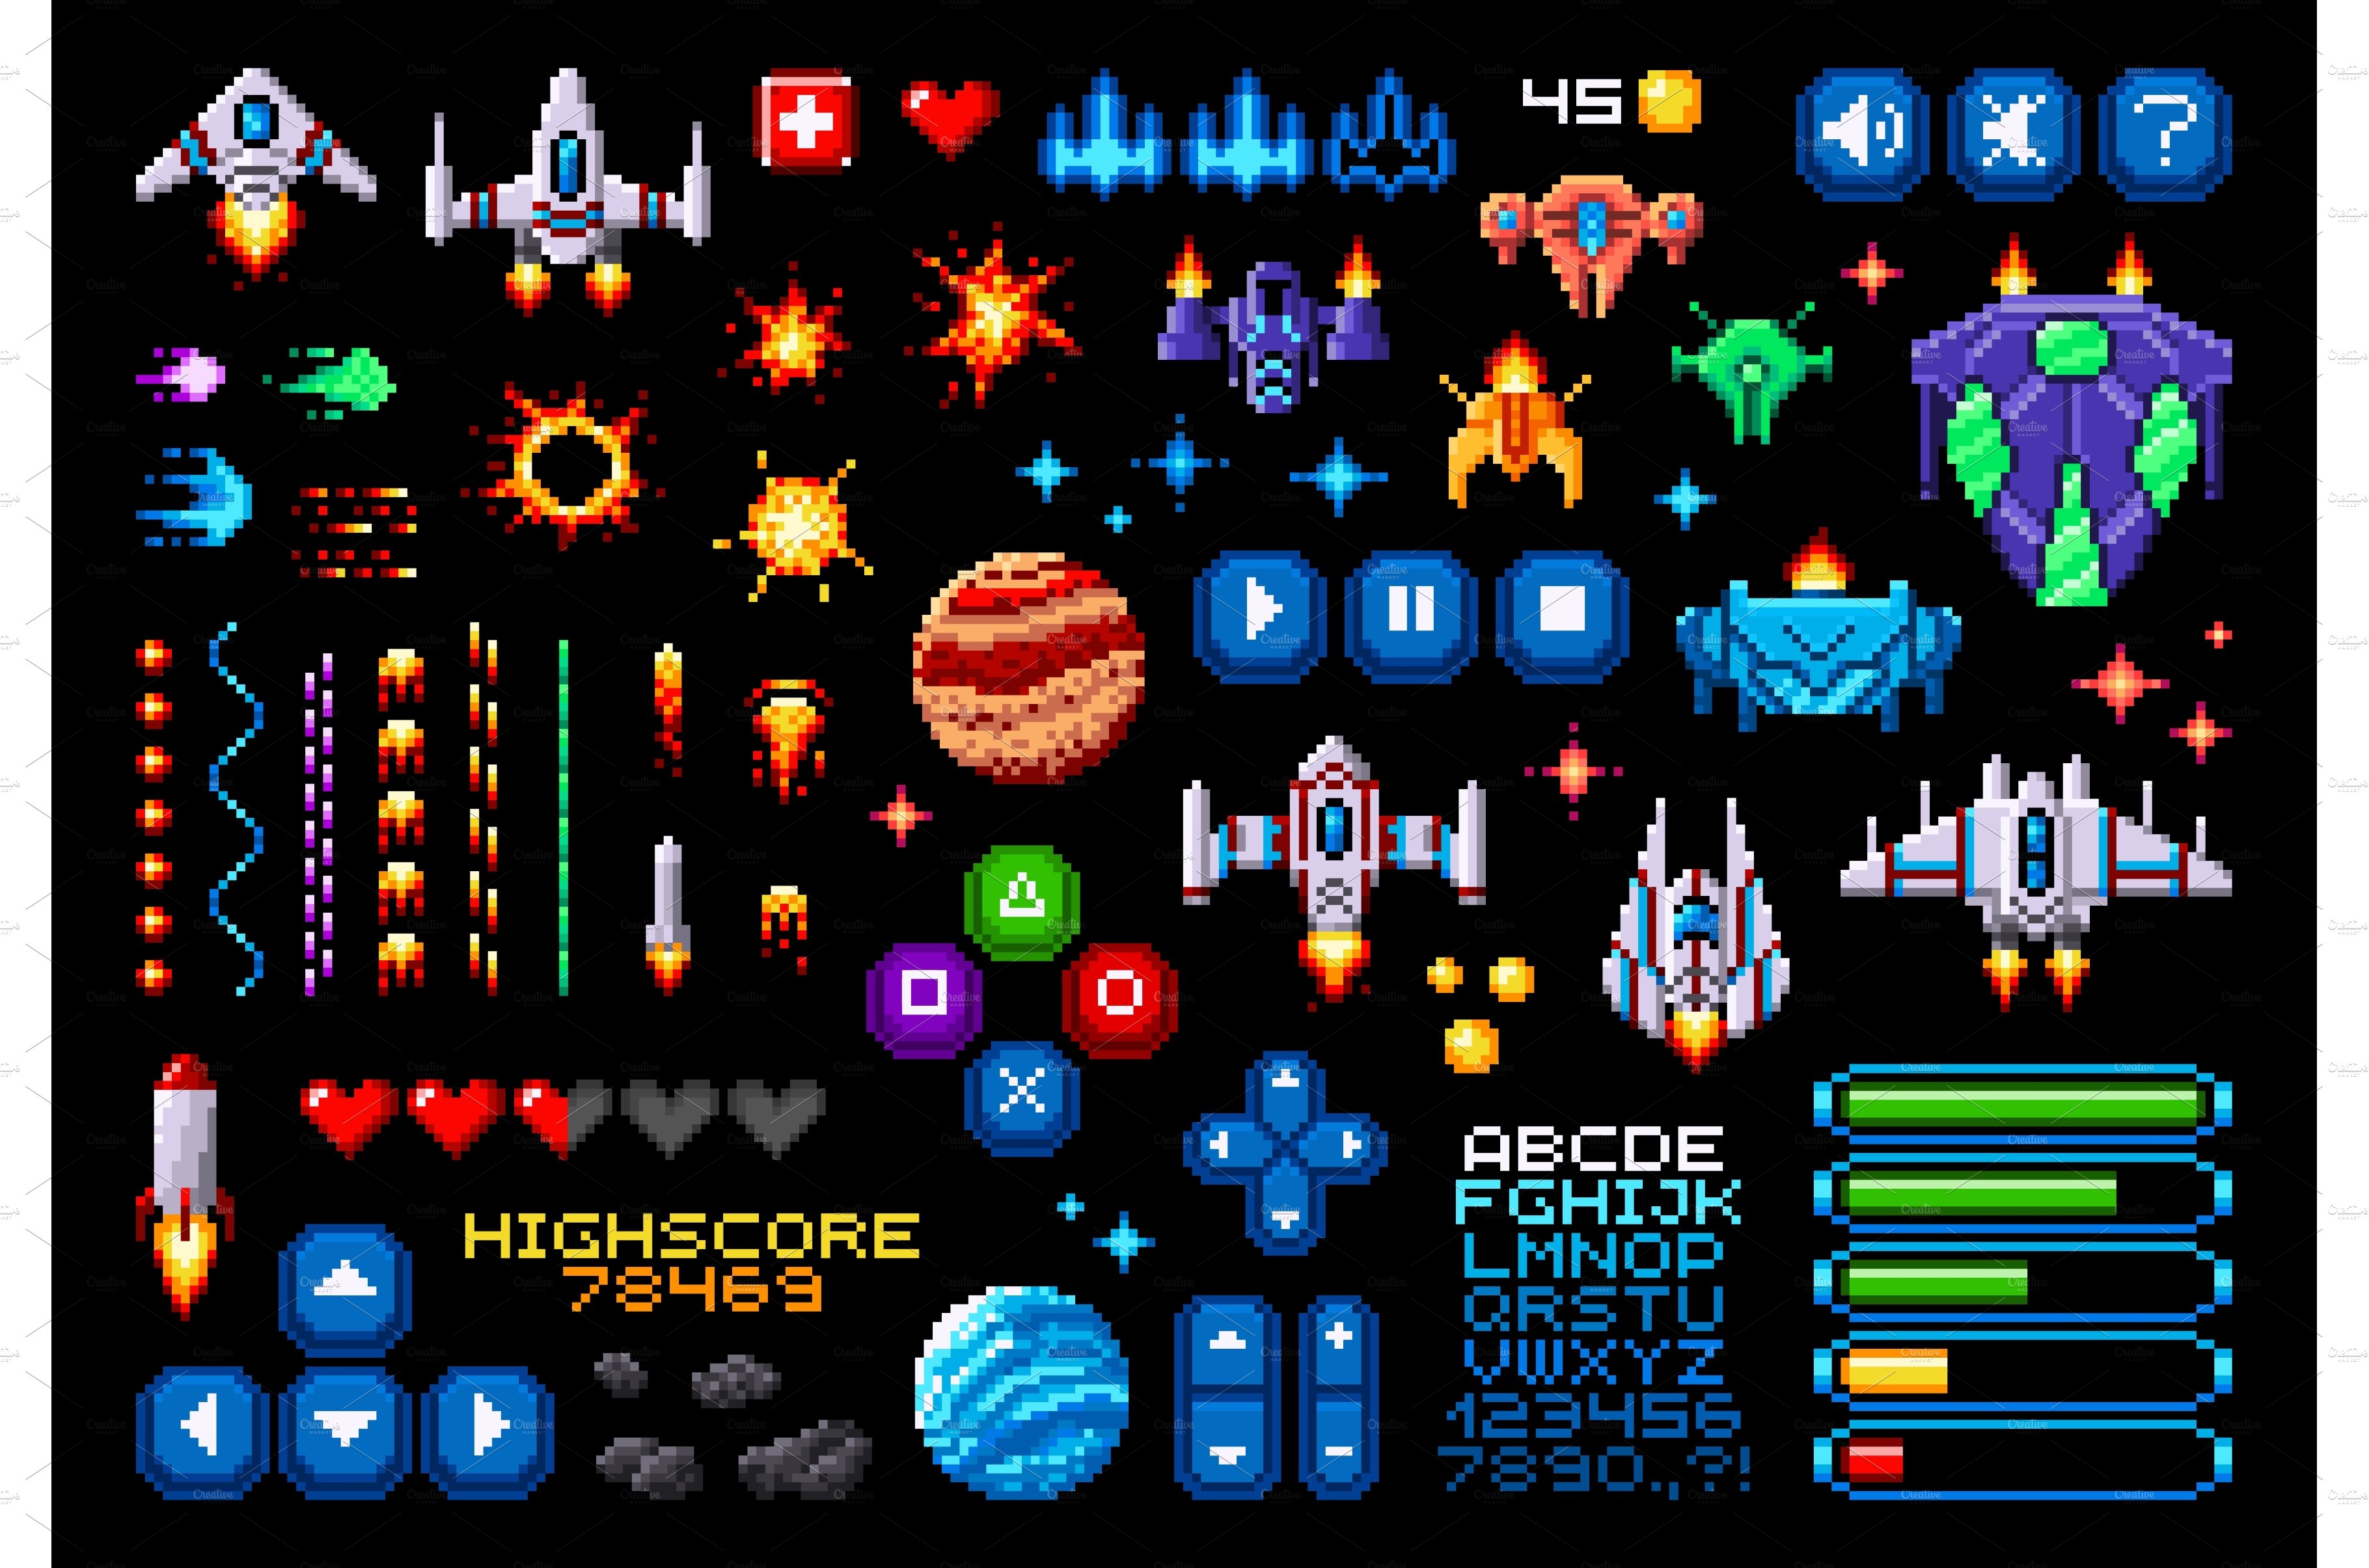 8bit pixel art game asset with space cover image.